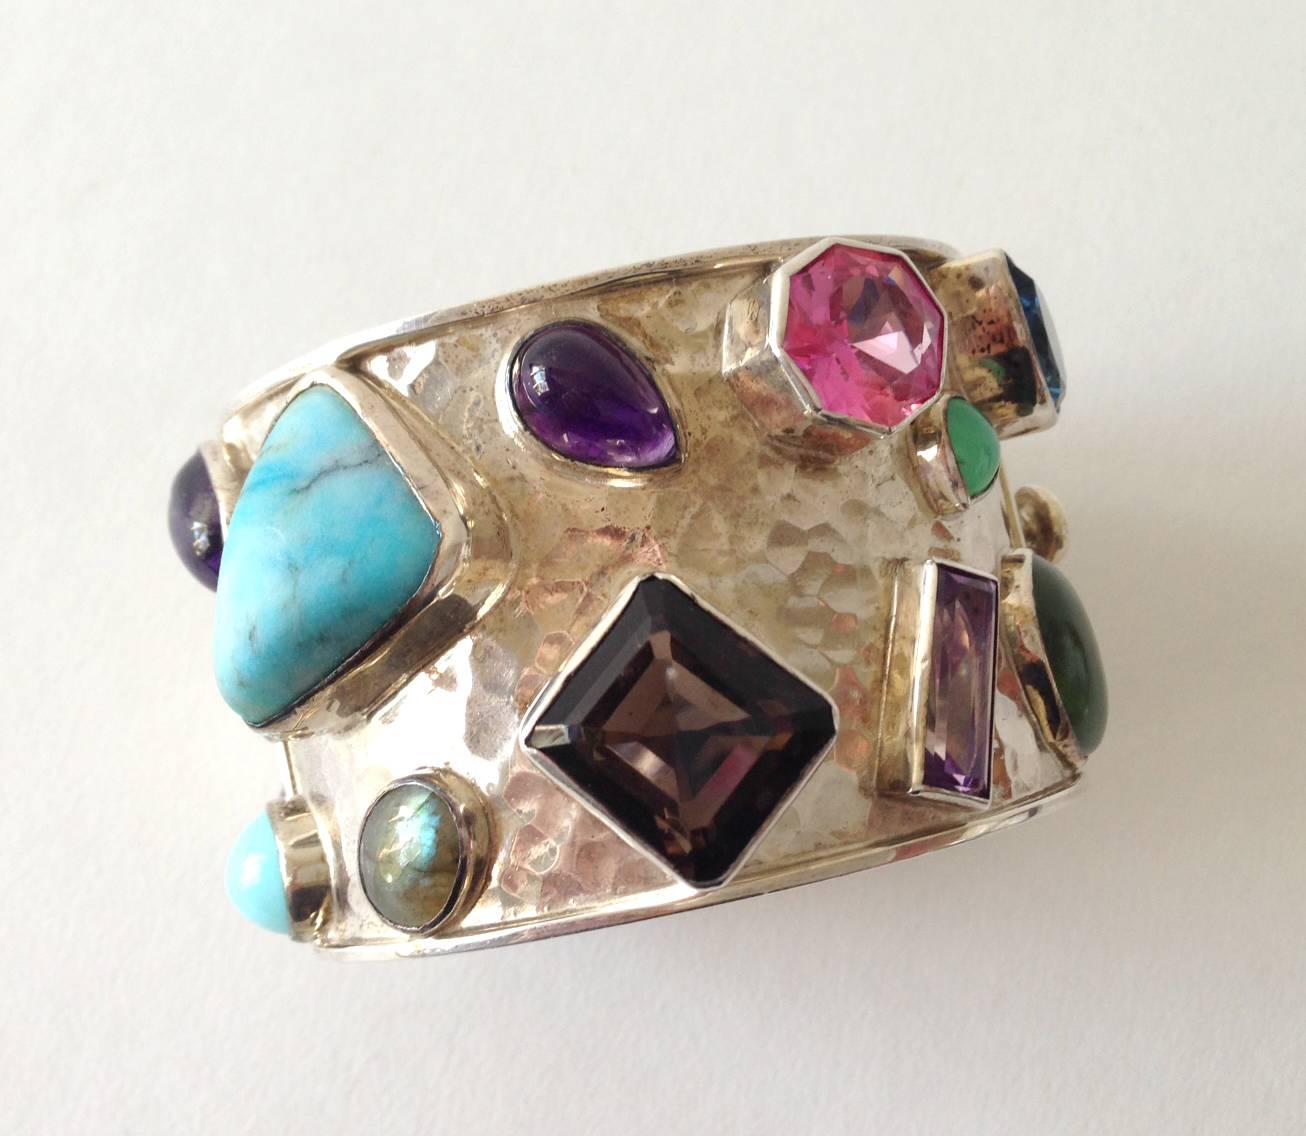 Multi colored semi-precious gemstones set in a sterling silver hinged cuff, created by Celia Harms of Mexico.  Each stone is bezel set within a hand hammered silver bracelet.  Bracelet has a wearable wrist length of 7"  and is 2" in width.